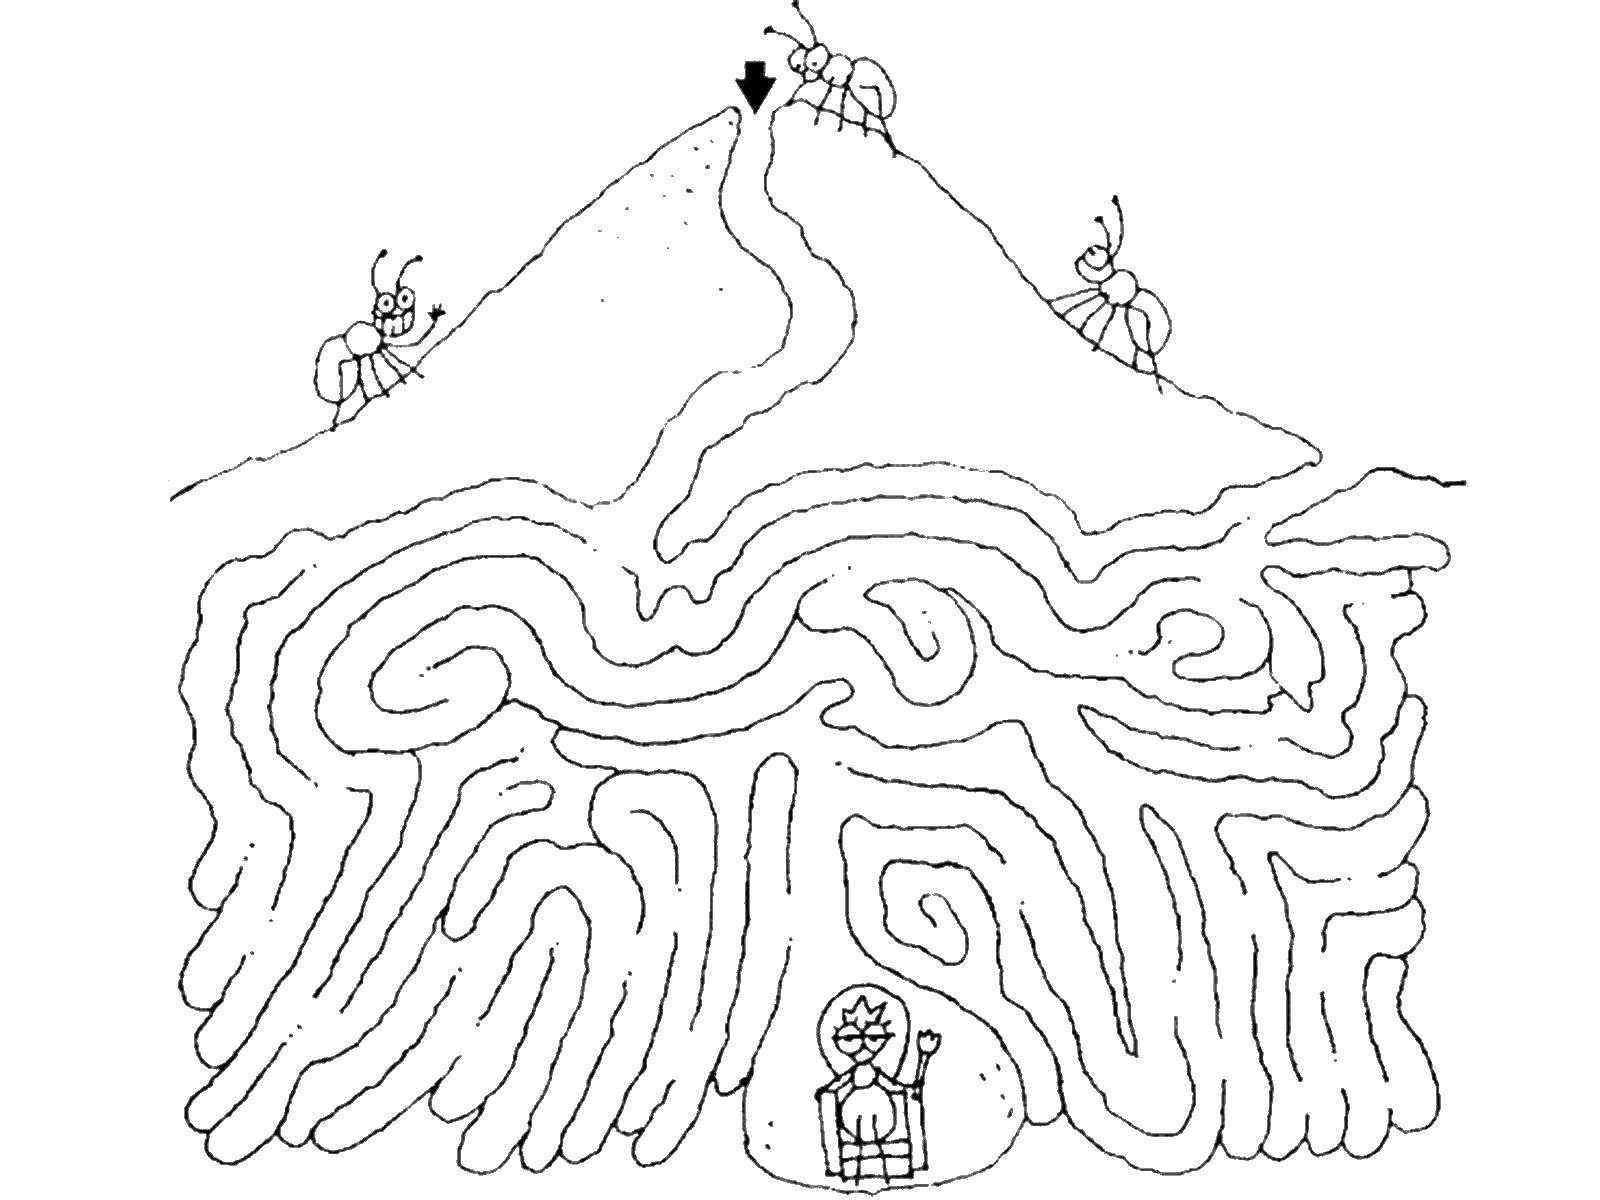 Coloring Ant is looking for the Queen. Category mazes. Tags:  The ant maze.